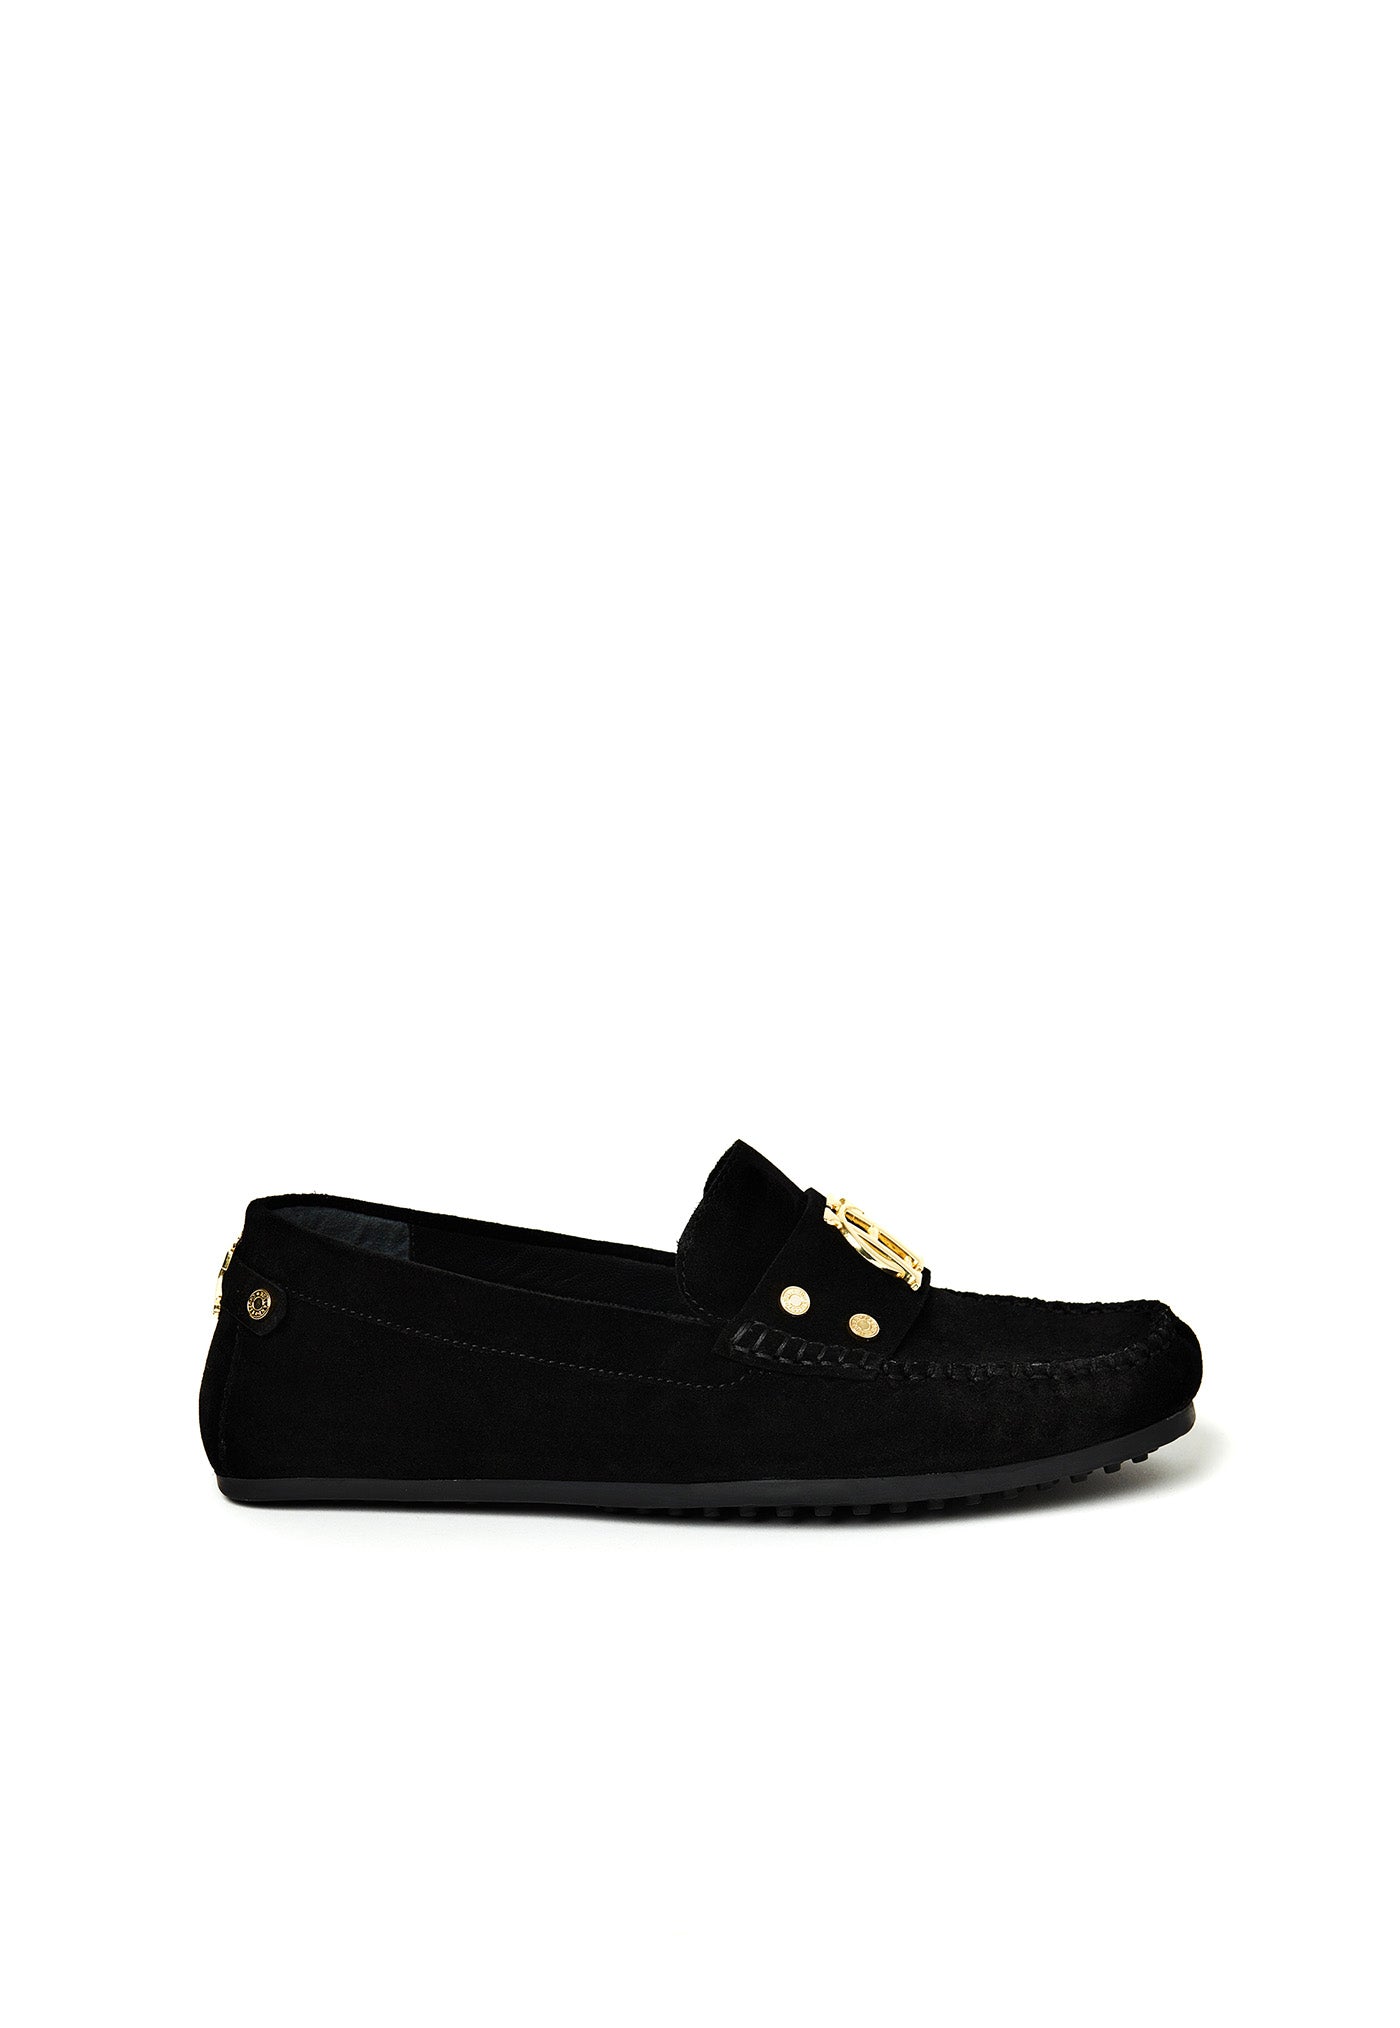 The Driving Loafer - Black sold by Angel Divine